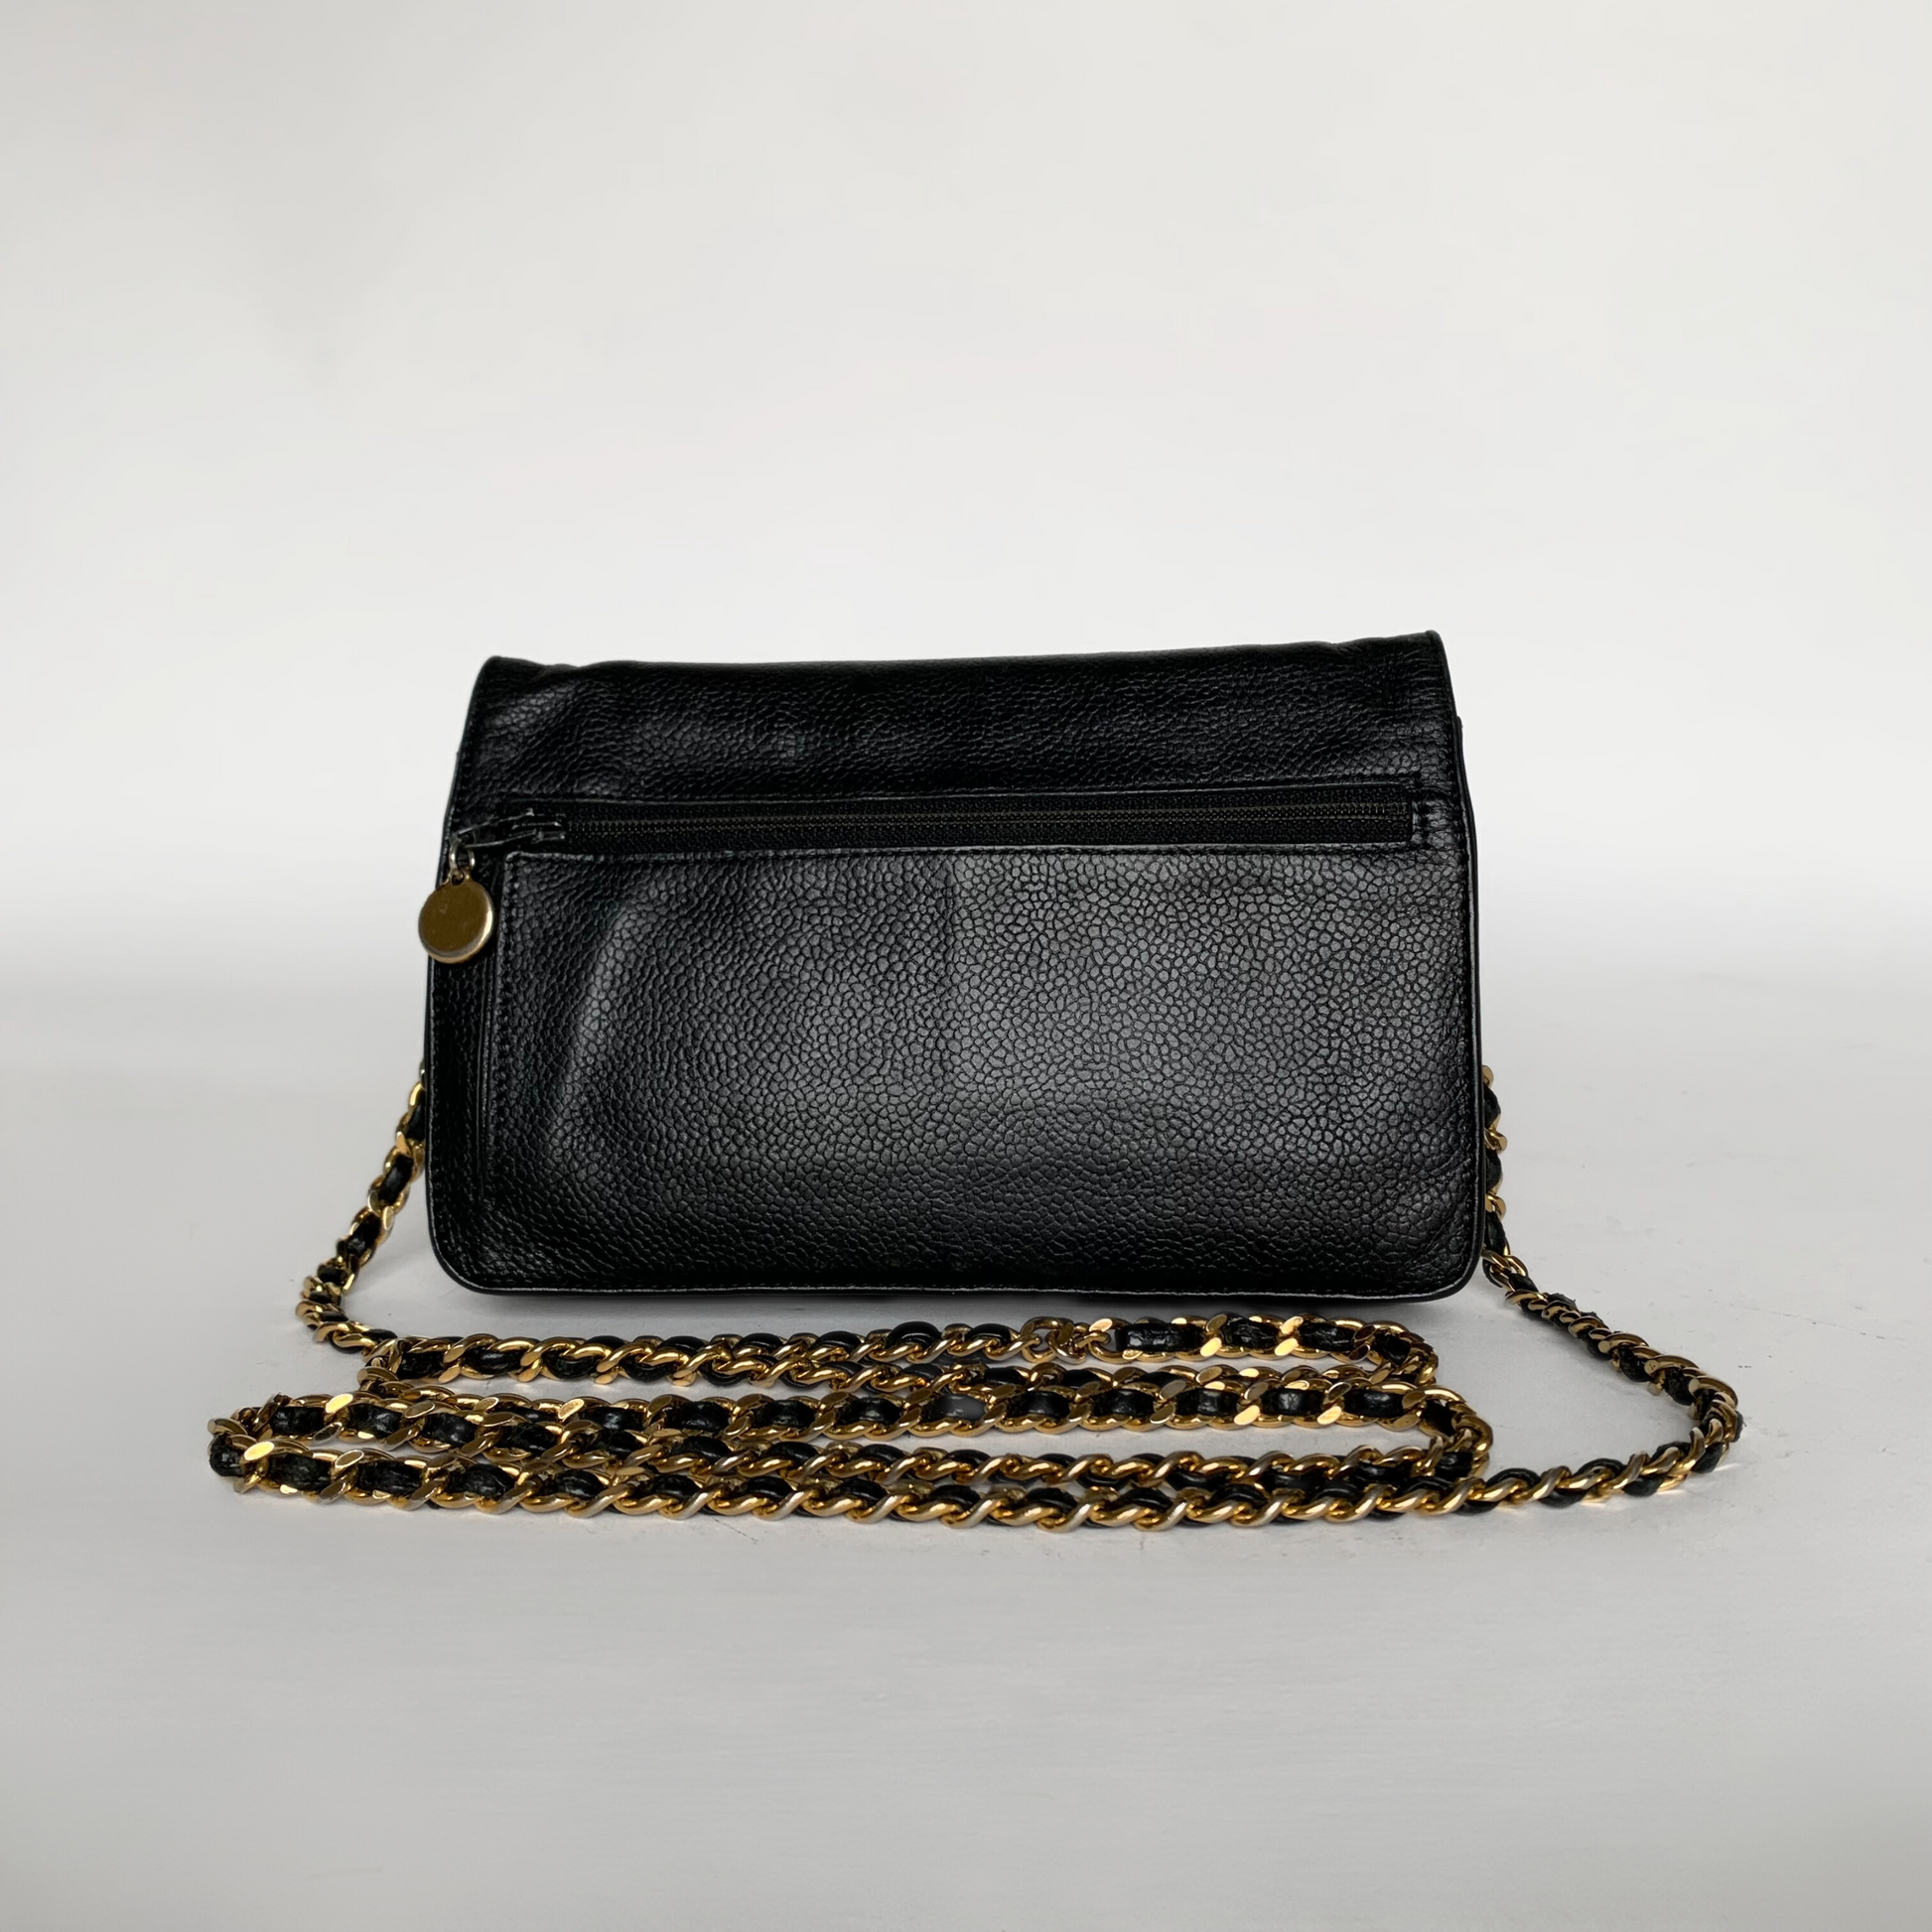 Chanel Chanel Wallet on a Chain Caviar Leather - Crossbody bags - Etoile Luxury Vintage